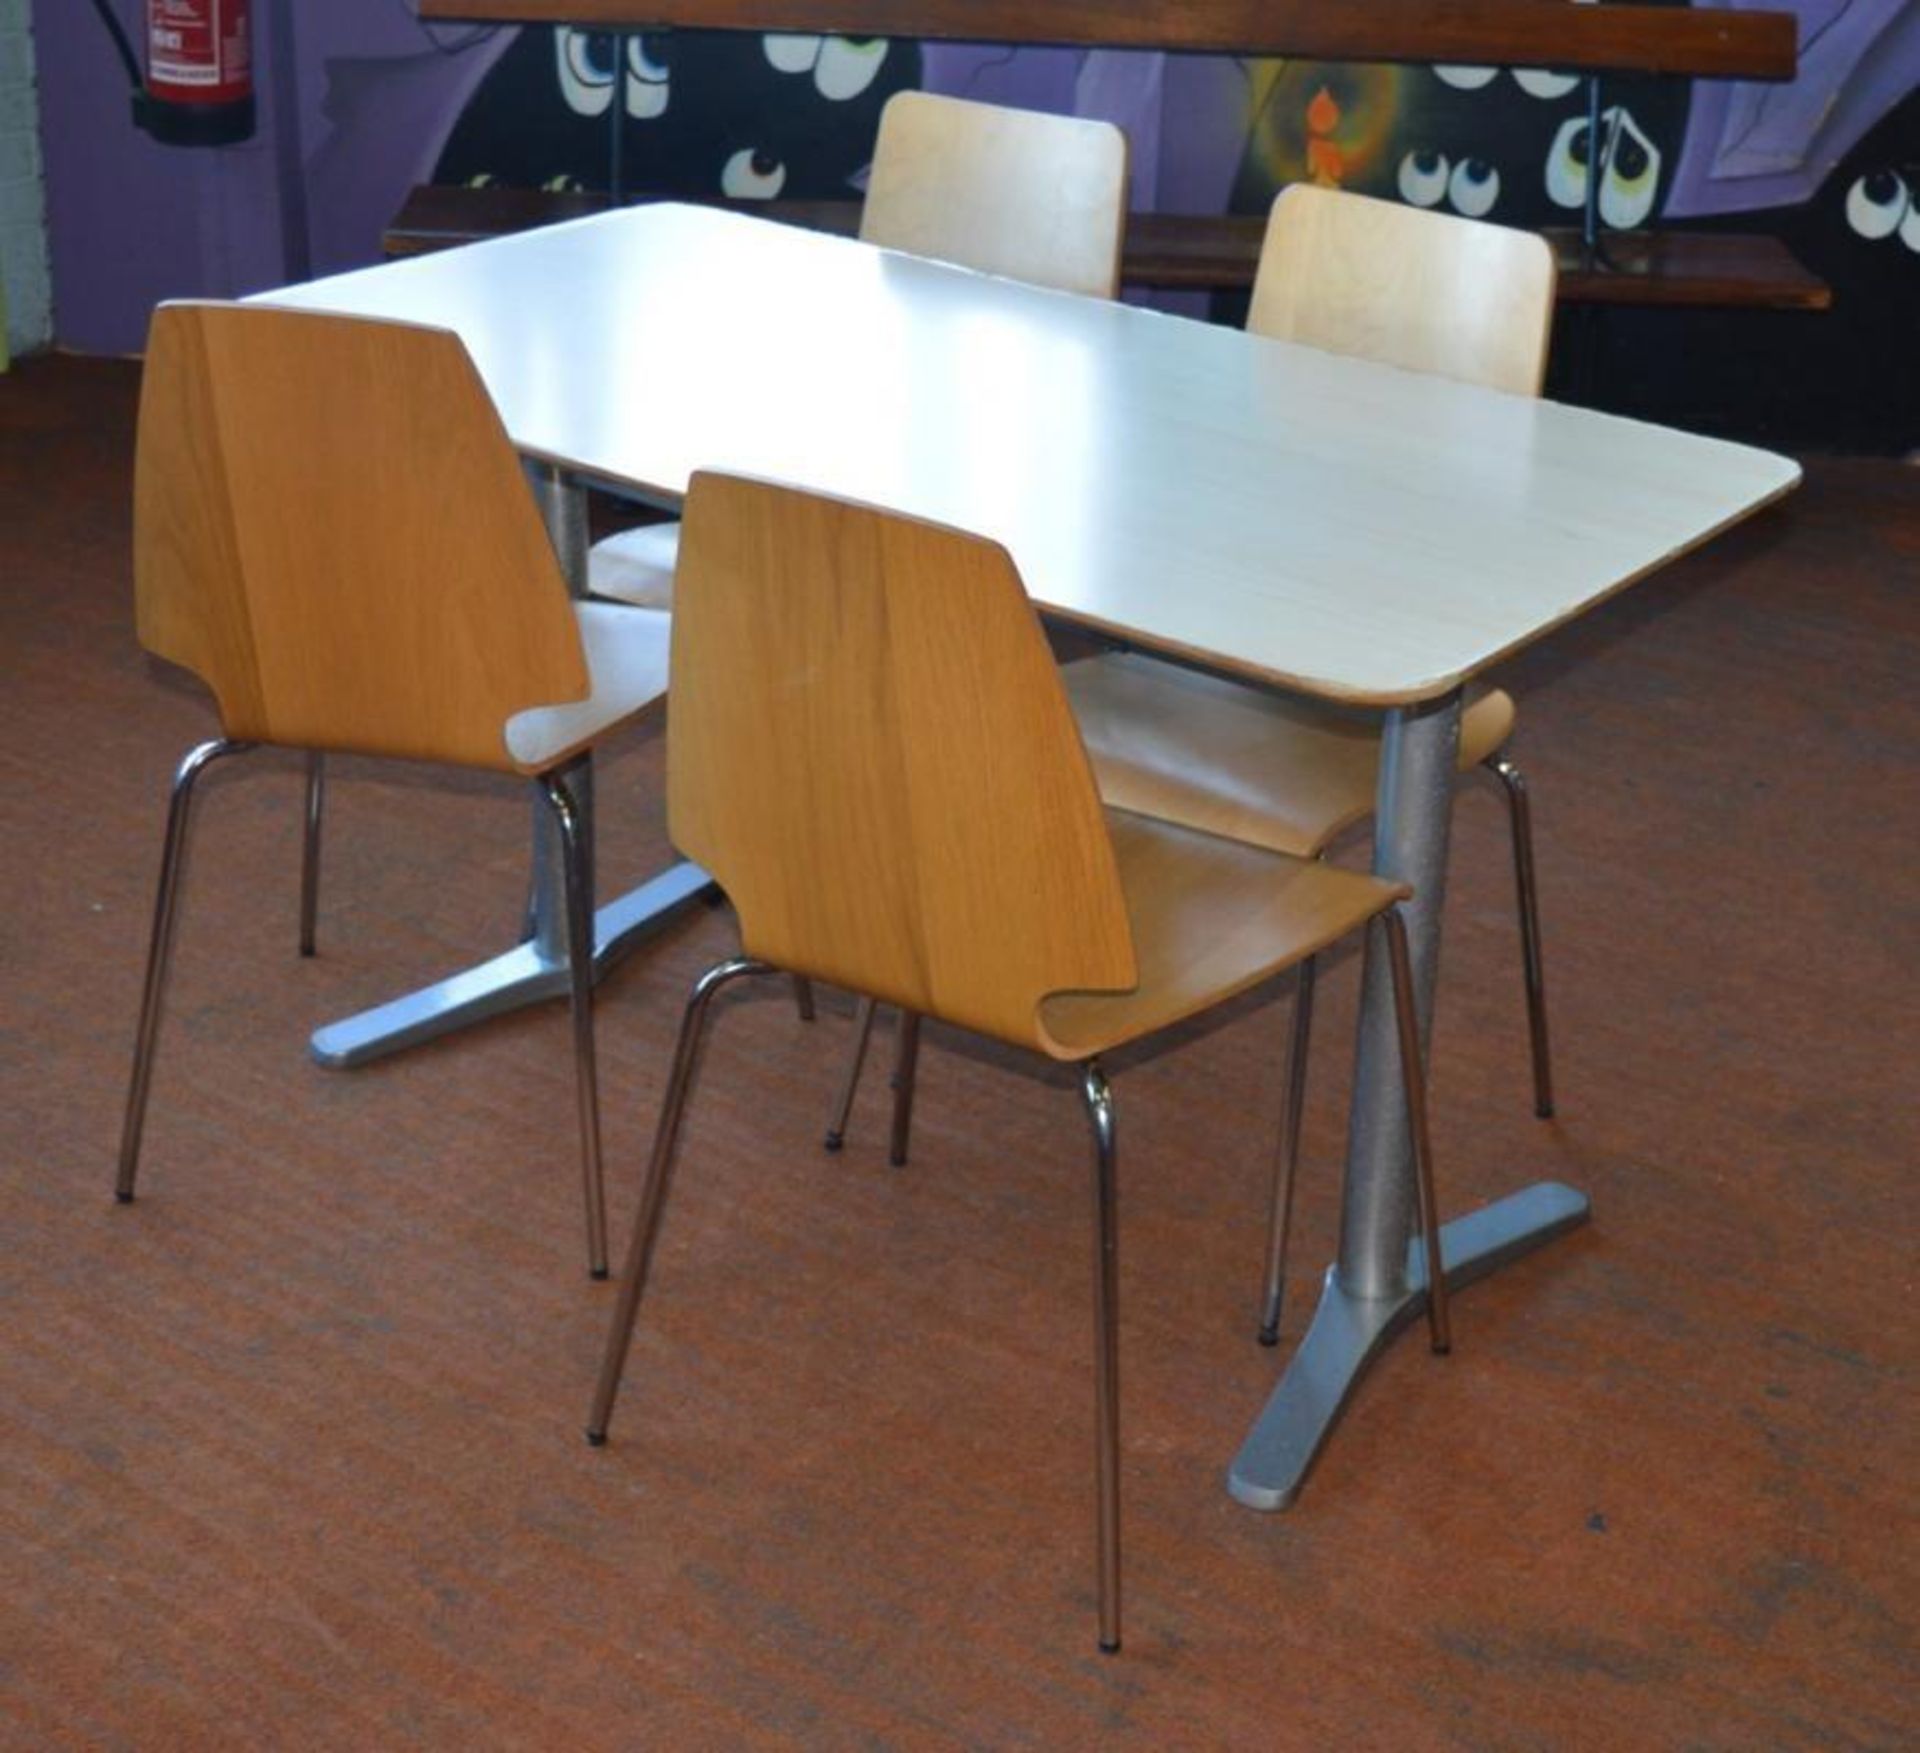 12 x Assorted Tables With Birch Wood Tops Heavy Duty Bases - Includes 8 x Four Seater Tables and 4 x - Image 3 of 6